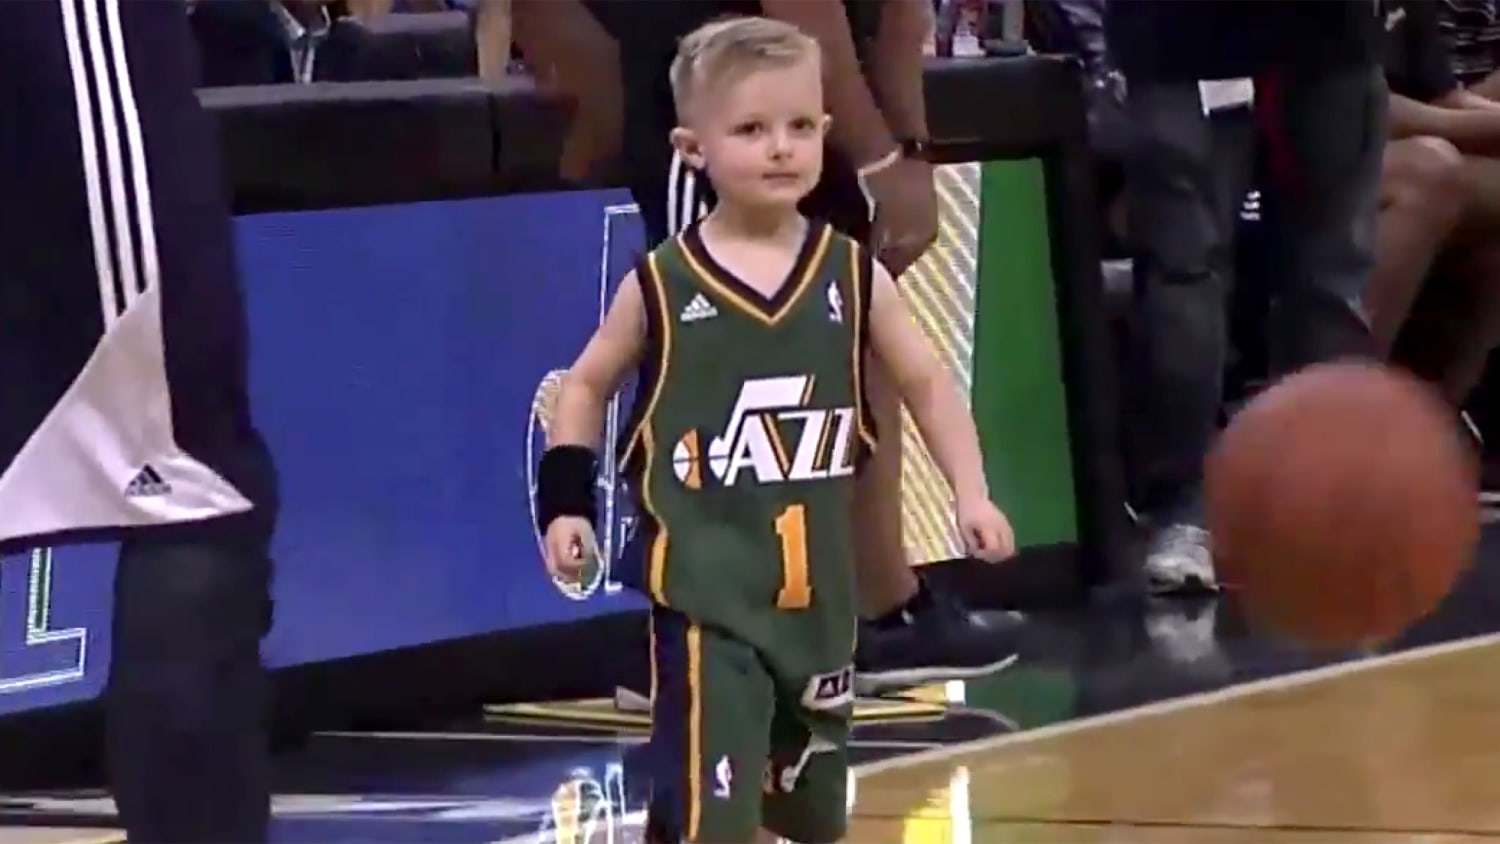 Utah Jazz sign 5-year-old JP Gibson to a one-day contract